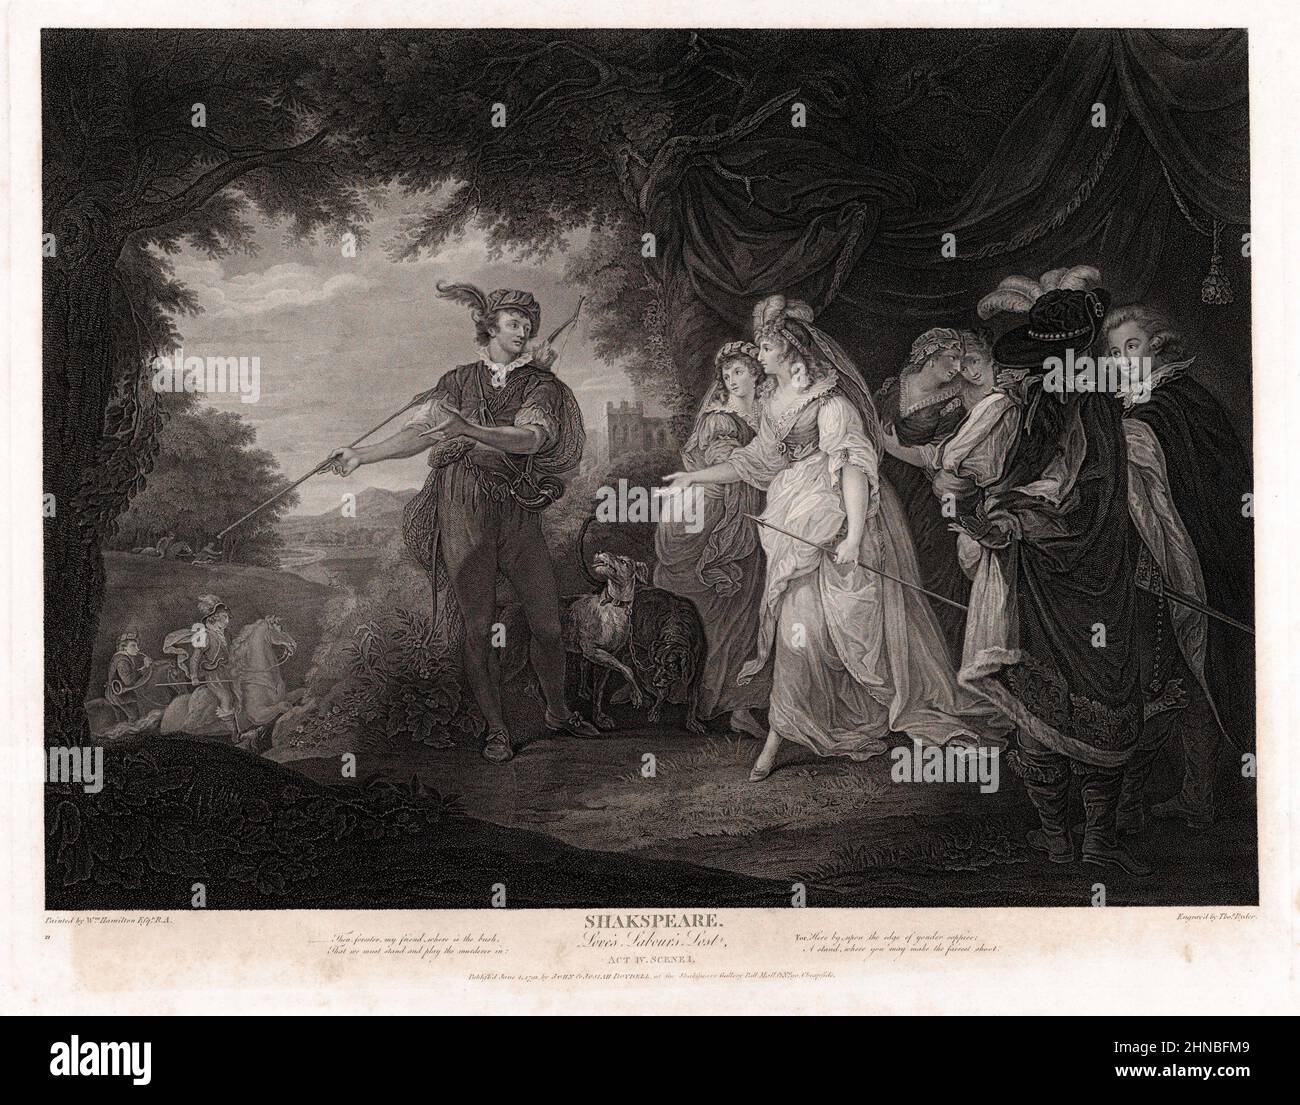 The Princess of France, Forester, Rosaline, Maria, Katherine and Lords Boyet and Costard in The King of Navarre’s park. Act 4 Scene 1 from Shakespeare, Love's Labour Lost Stock Photo